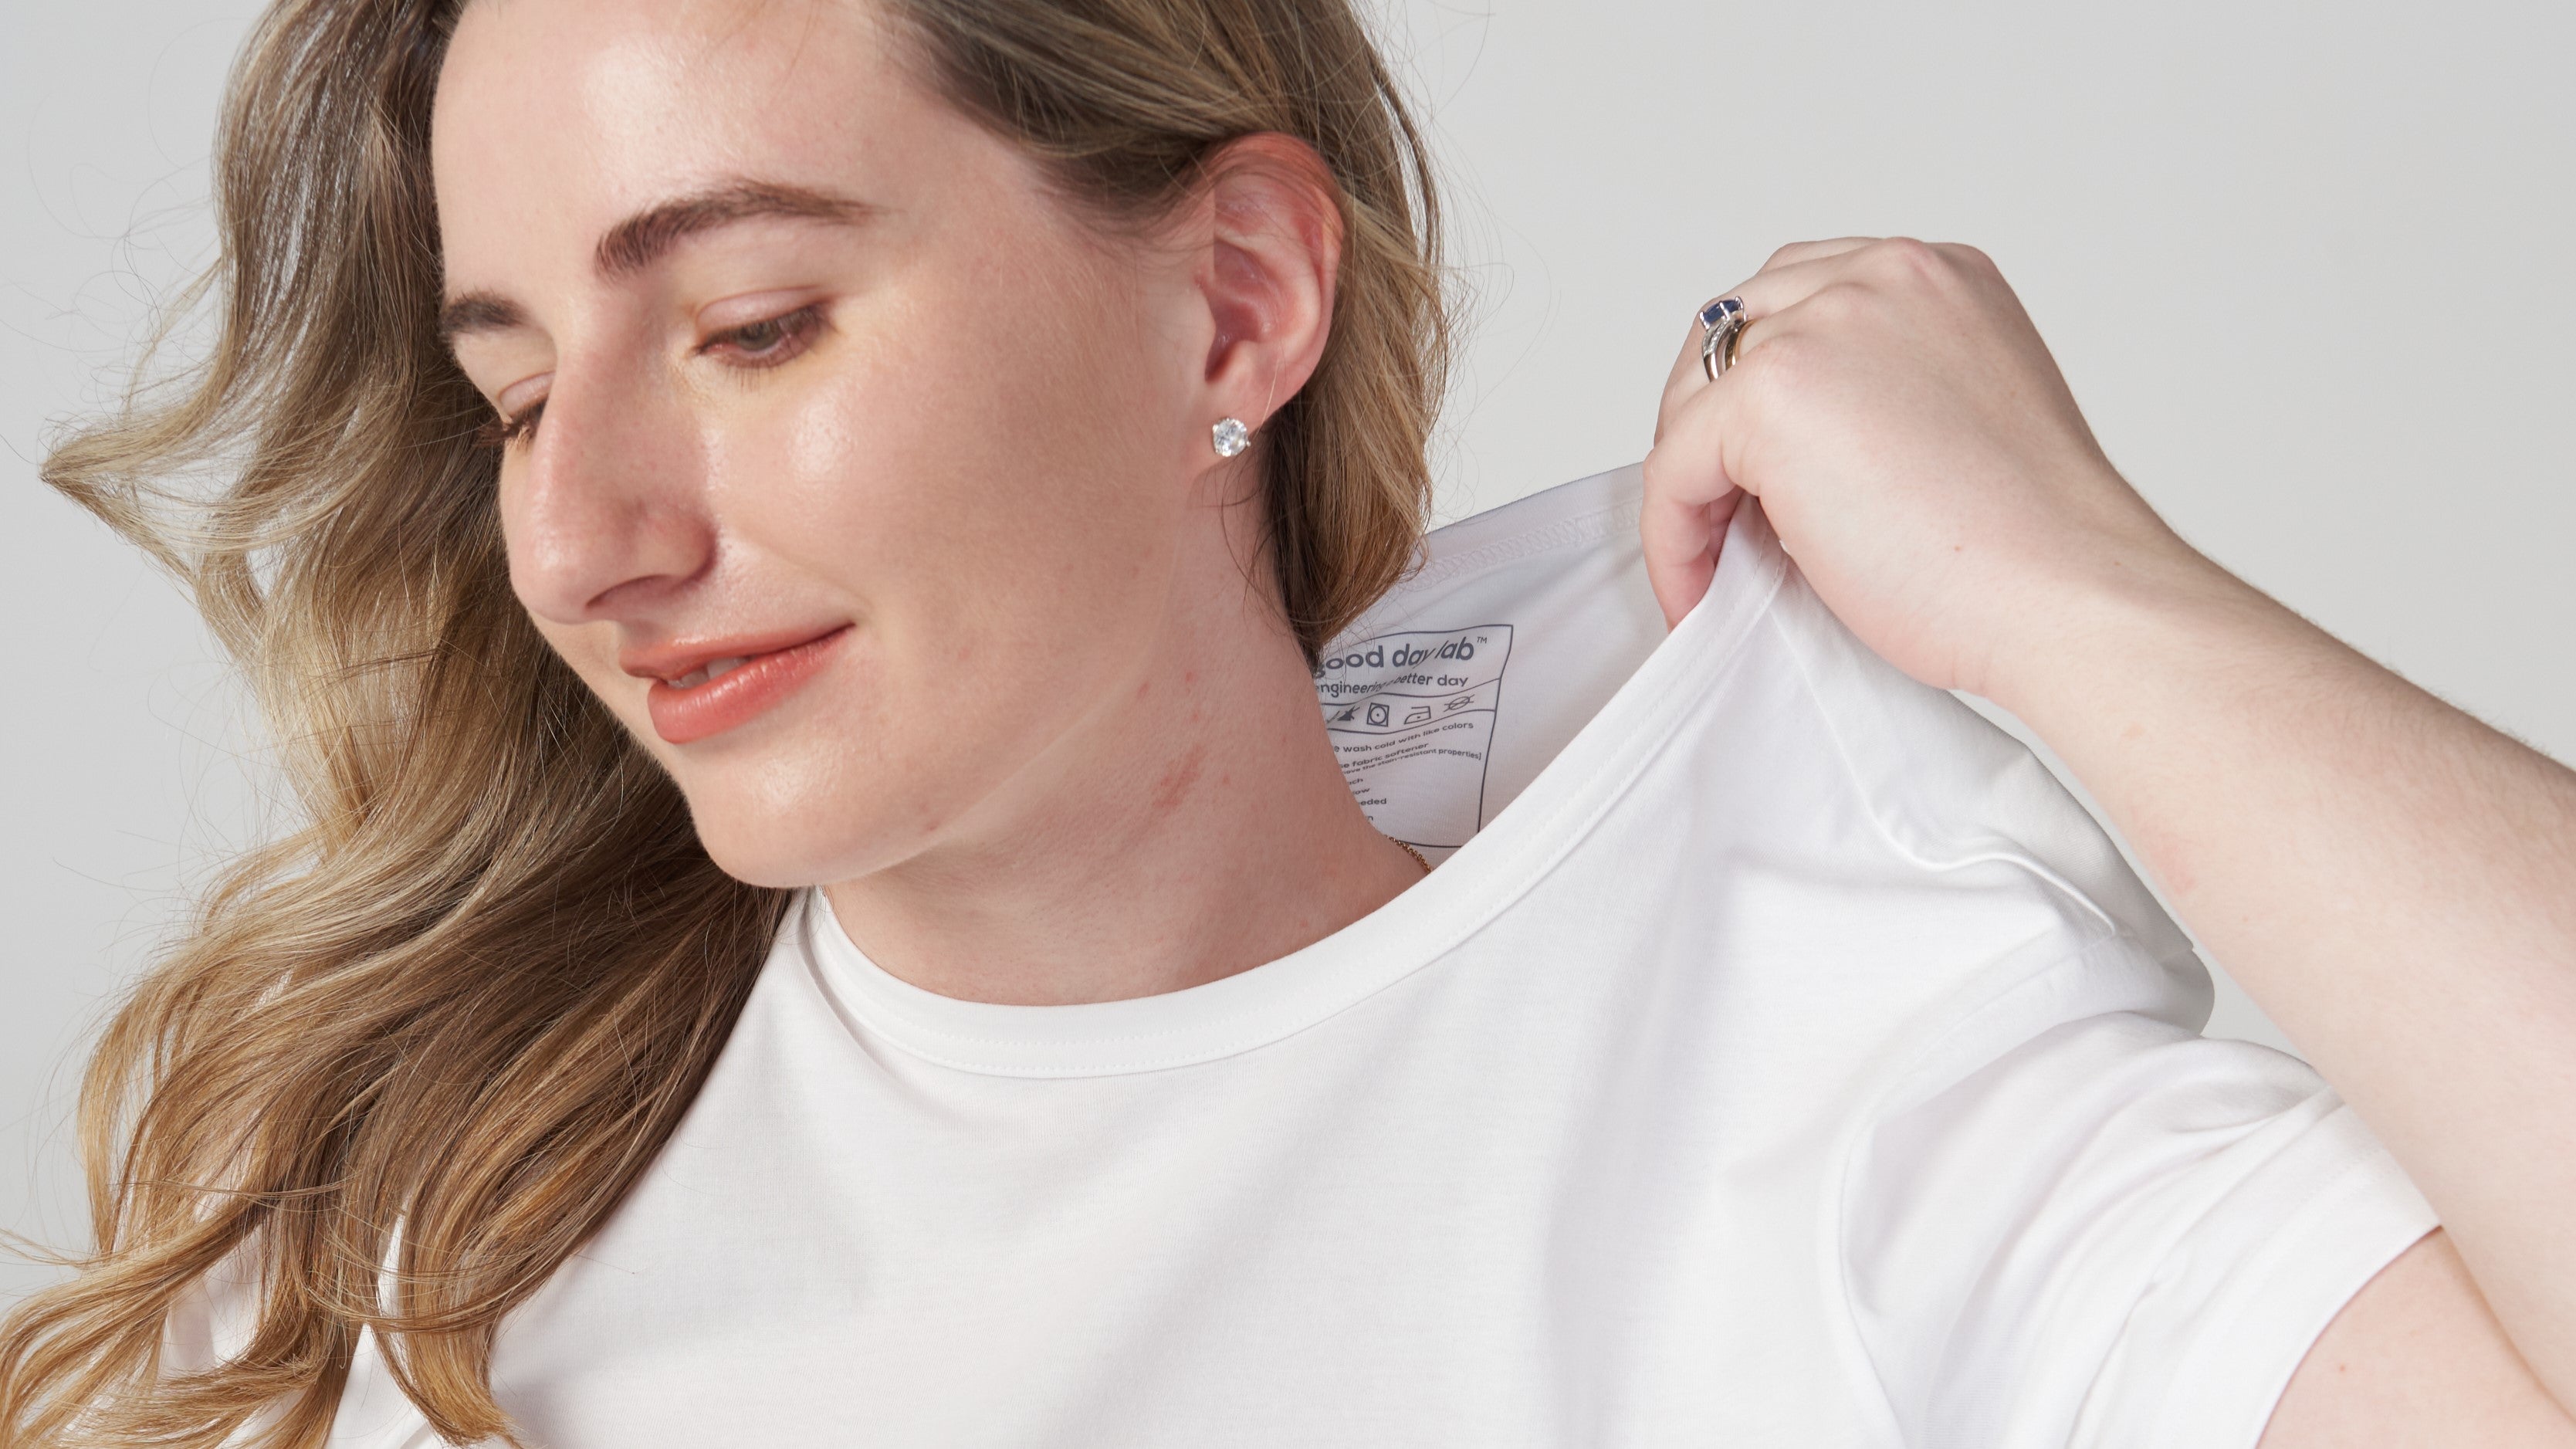 Adult Tees Are Stain-Proof Too!! – The Good Day Lab